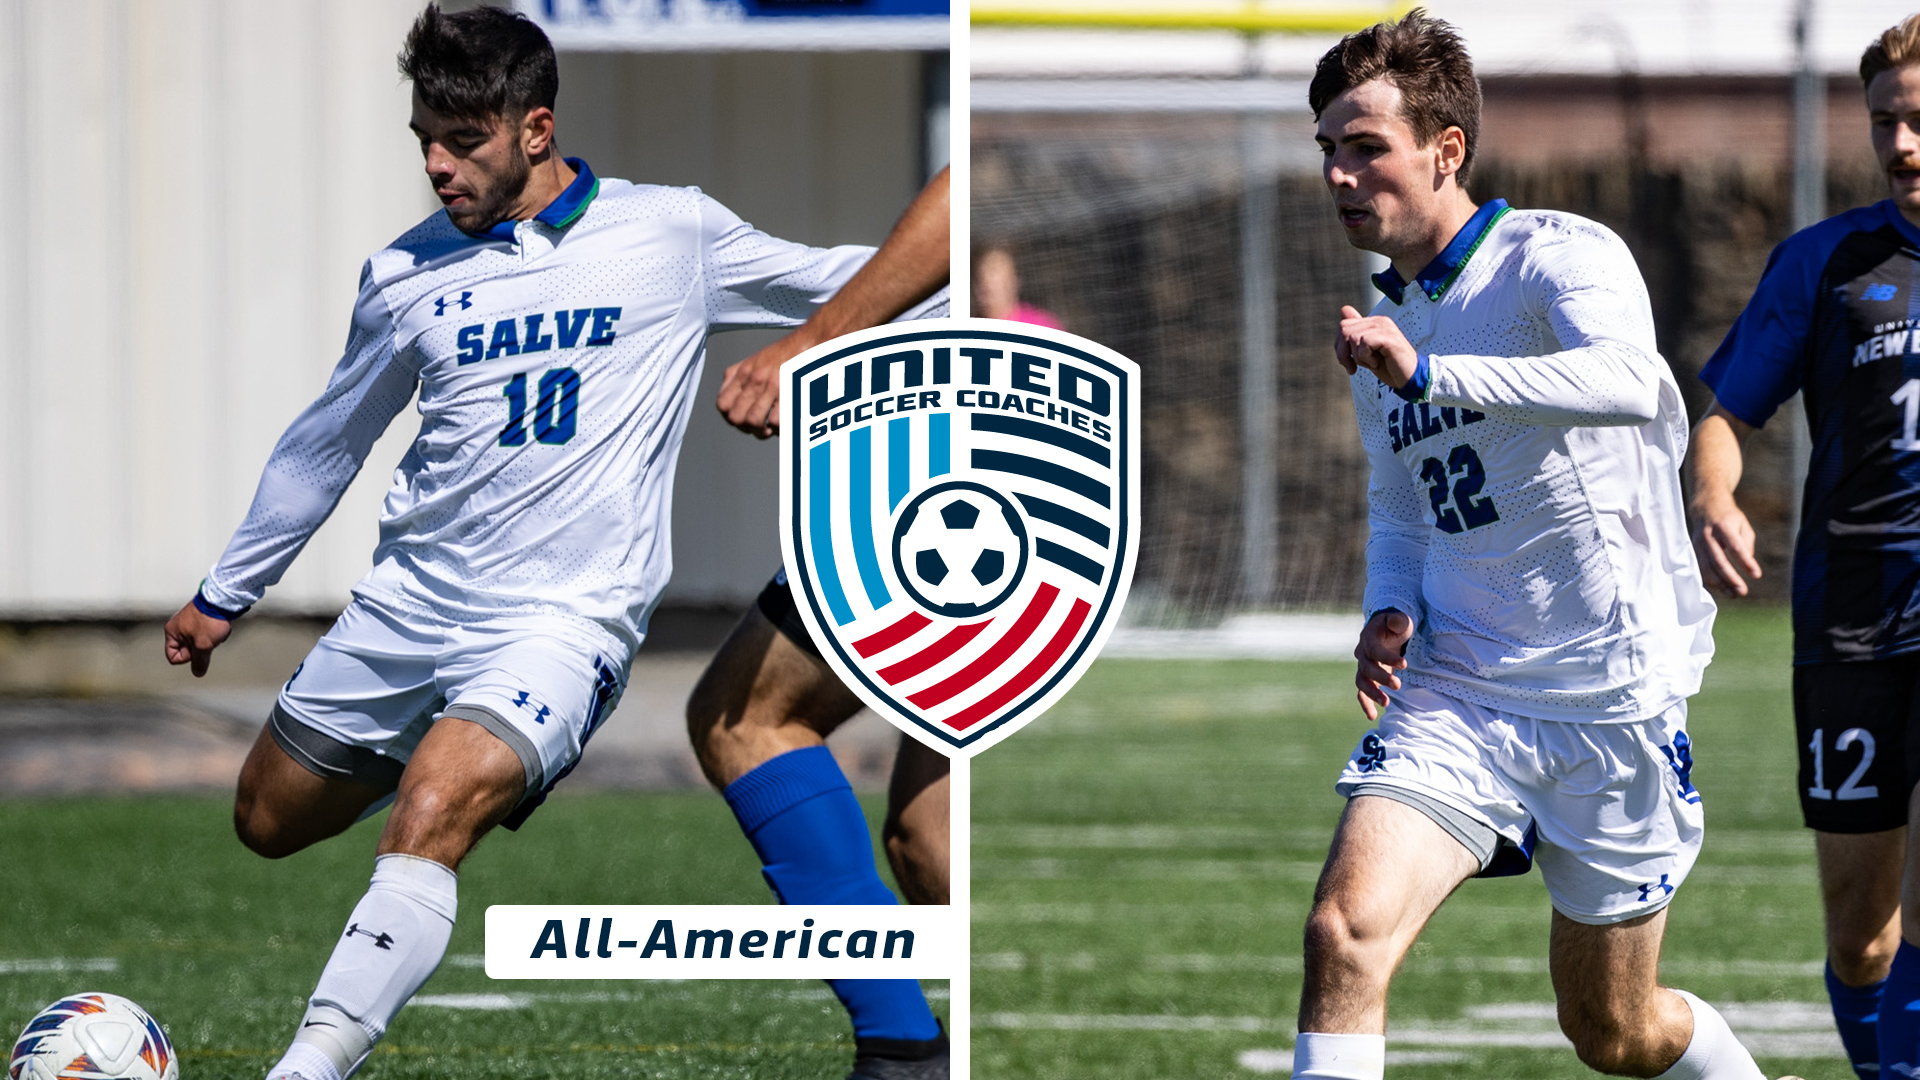 Jordan Borges and Evan Arpin were named Scholar All-Americans.